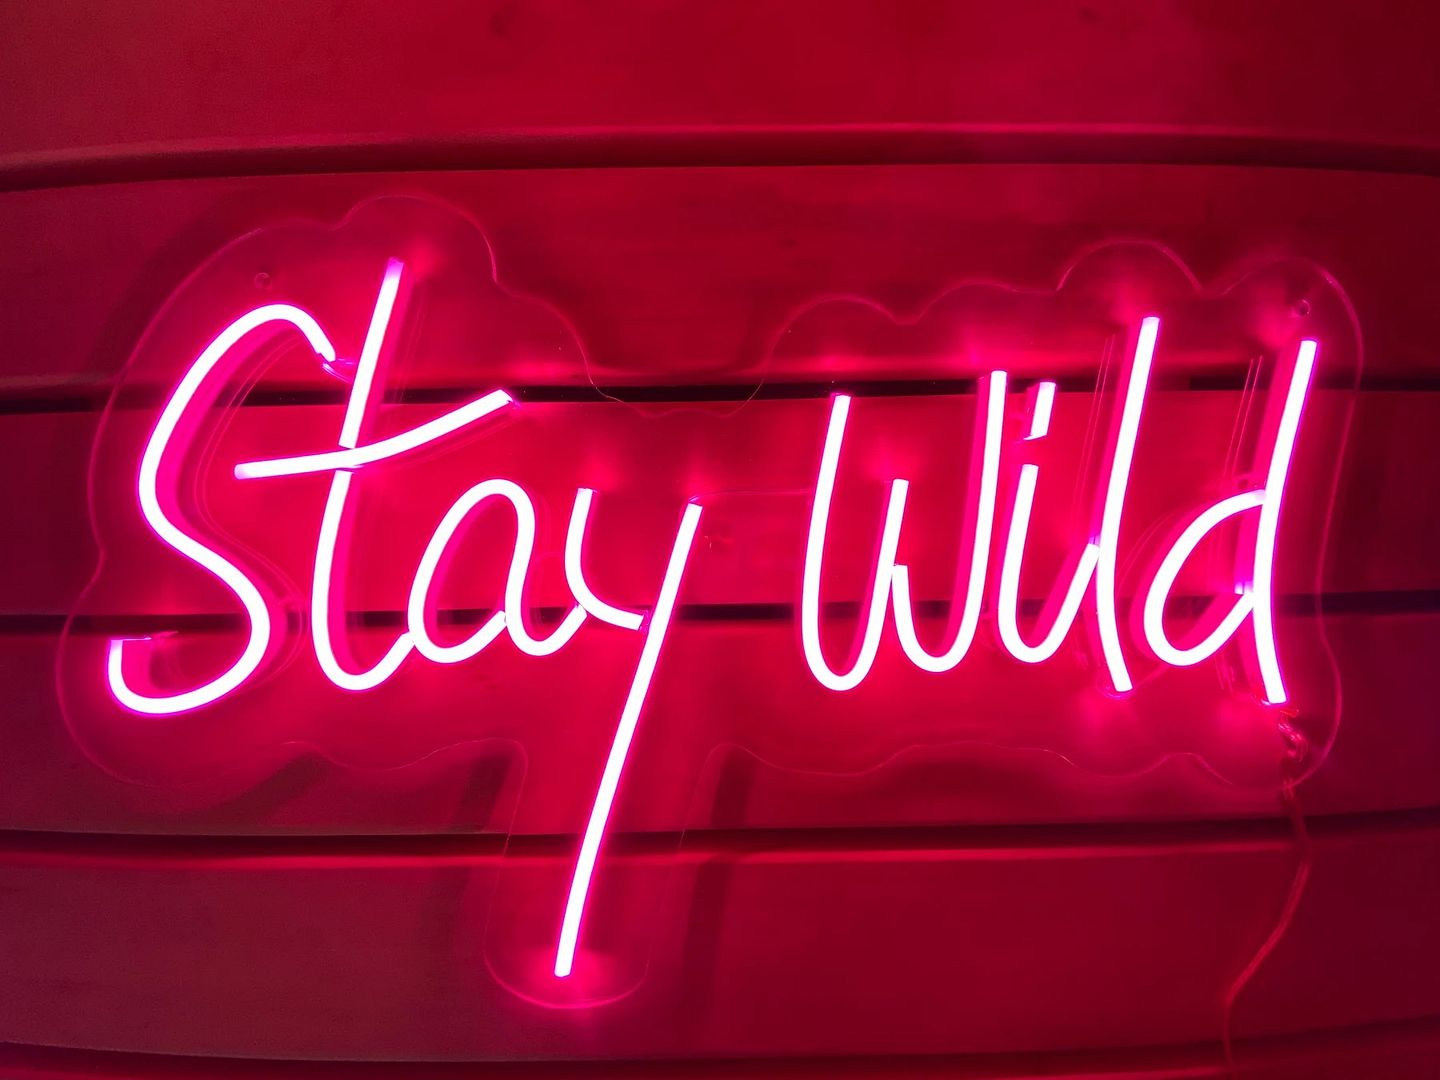 Stay Wild Neon Sign